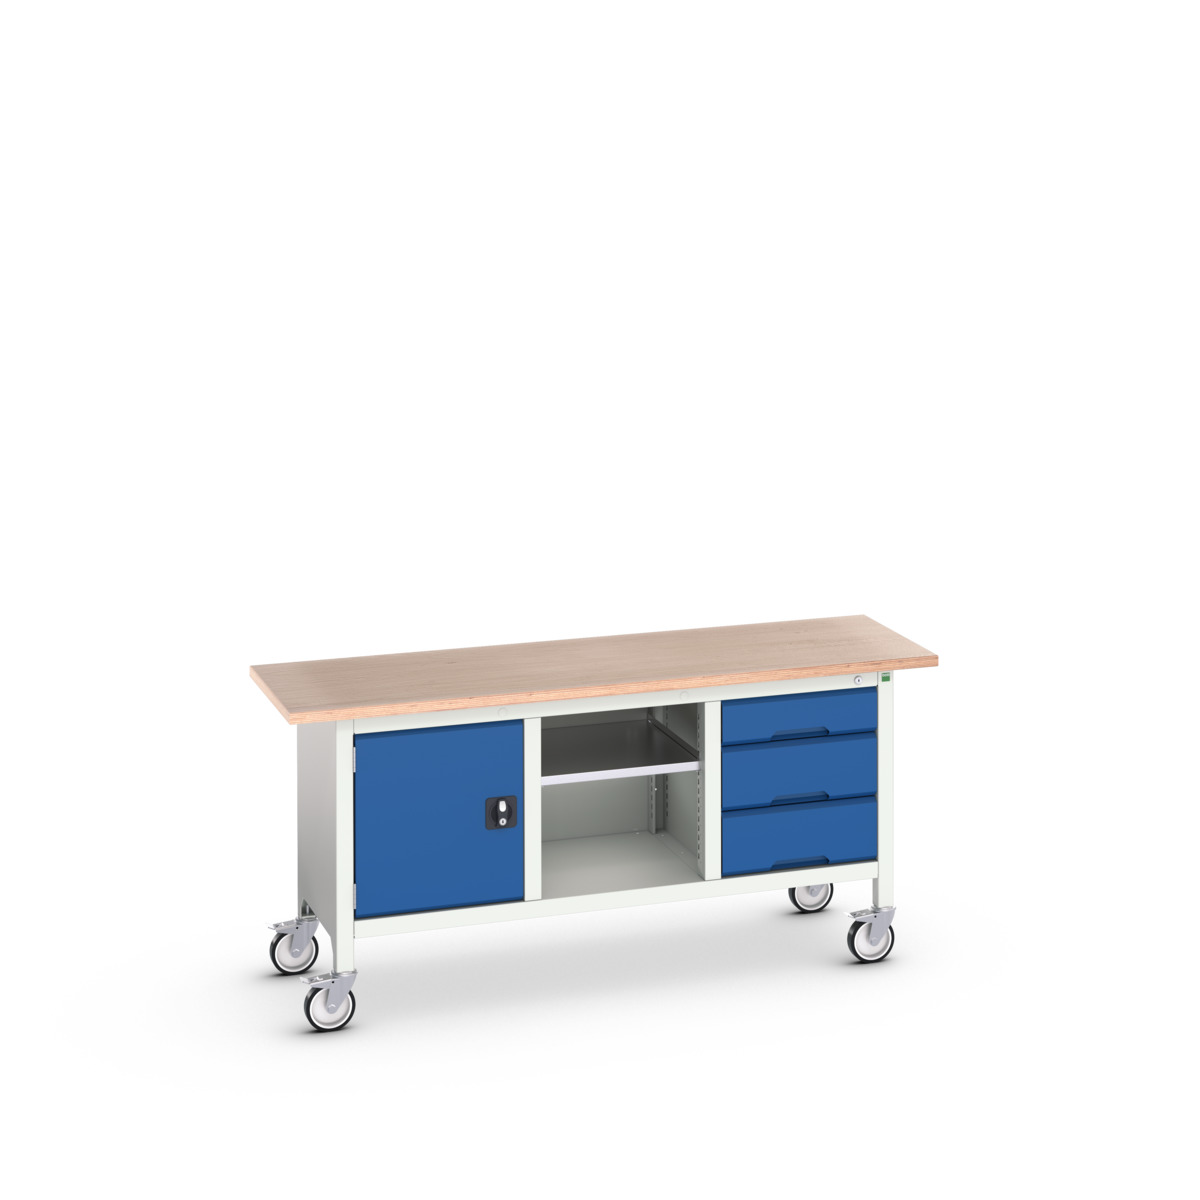 16923220.11 - verso mobile storage bench (mpx)